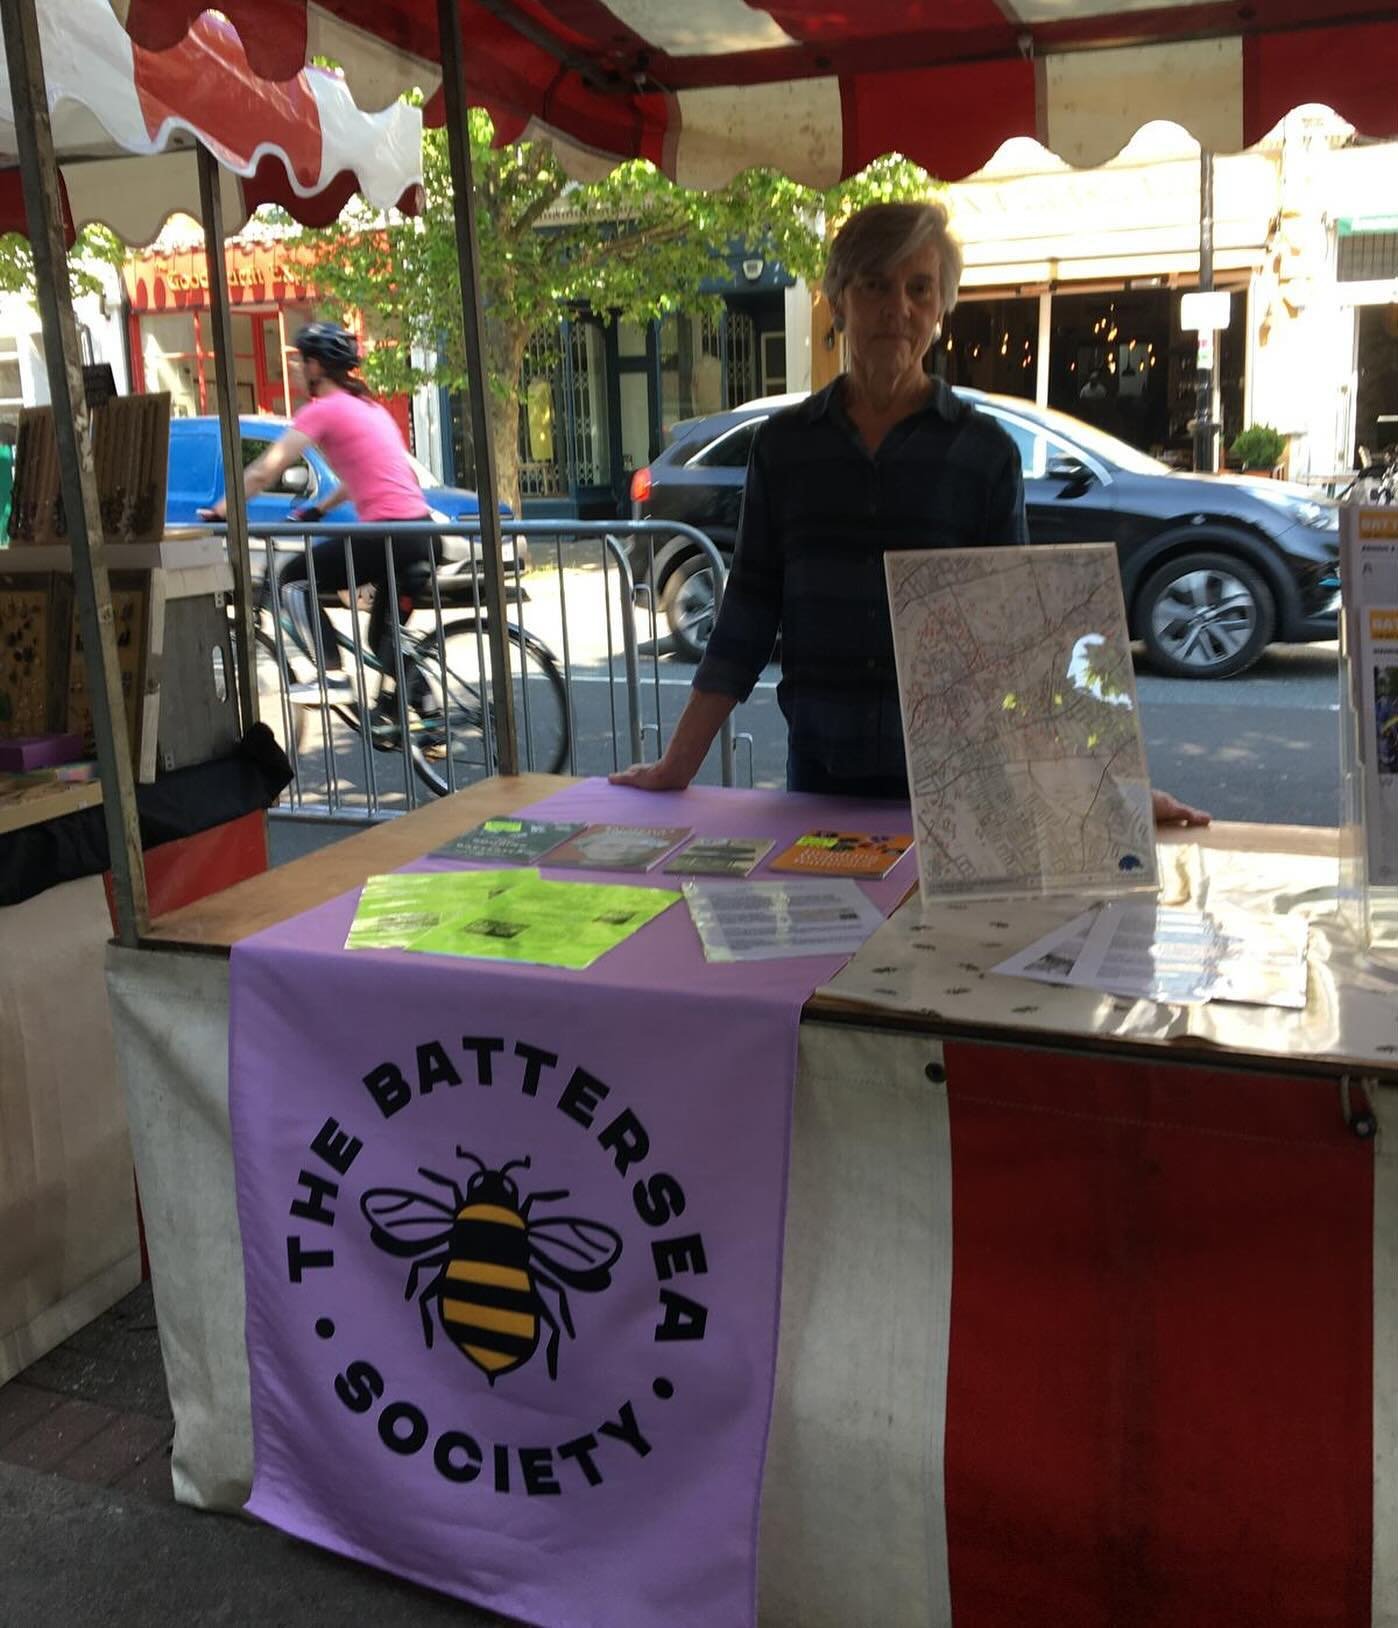 Lovely weather for the St John&rsquo;s Festival today. We were there with our Battersea Society stall and enjoyed chatting with people about the wonders of Battersea! #battersea #stjohnshill #heartofbattersea #batterseasociety